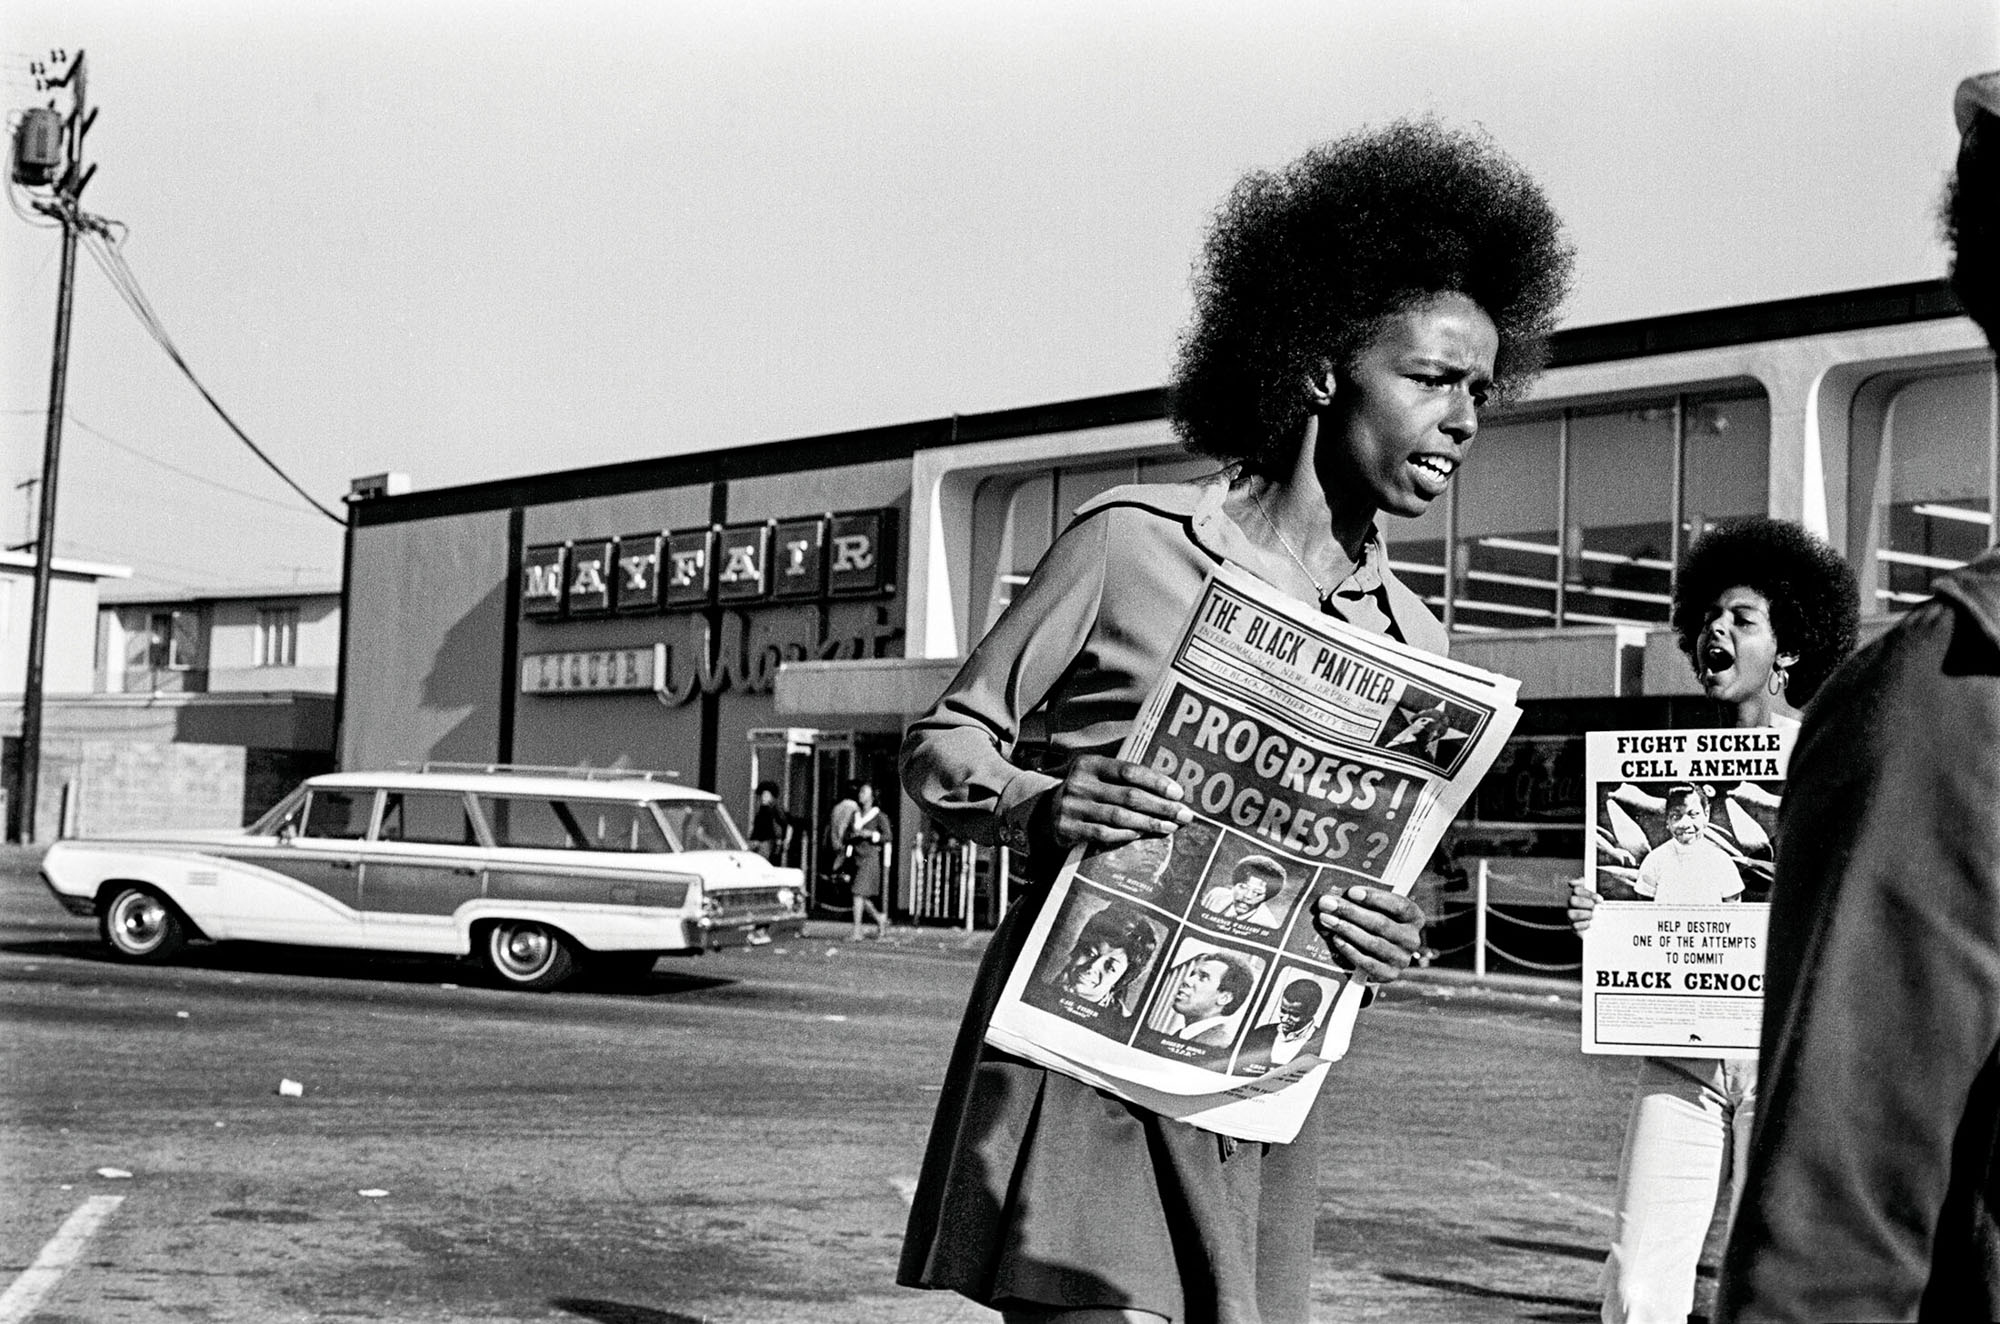 1971 - Oakland, California: Gloria Abernethy, woman of the Black Panther Party, sells the Black Panther newspaper at the Mayfair supermarket boycott. Tamara Lacey holds a Sickle Cell Anemia poster.